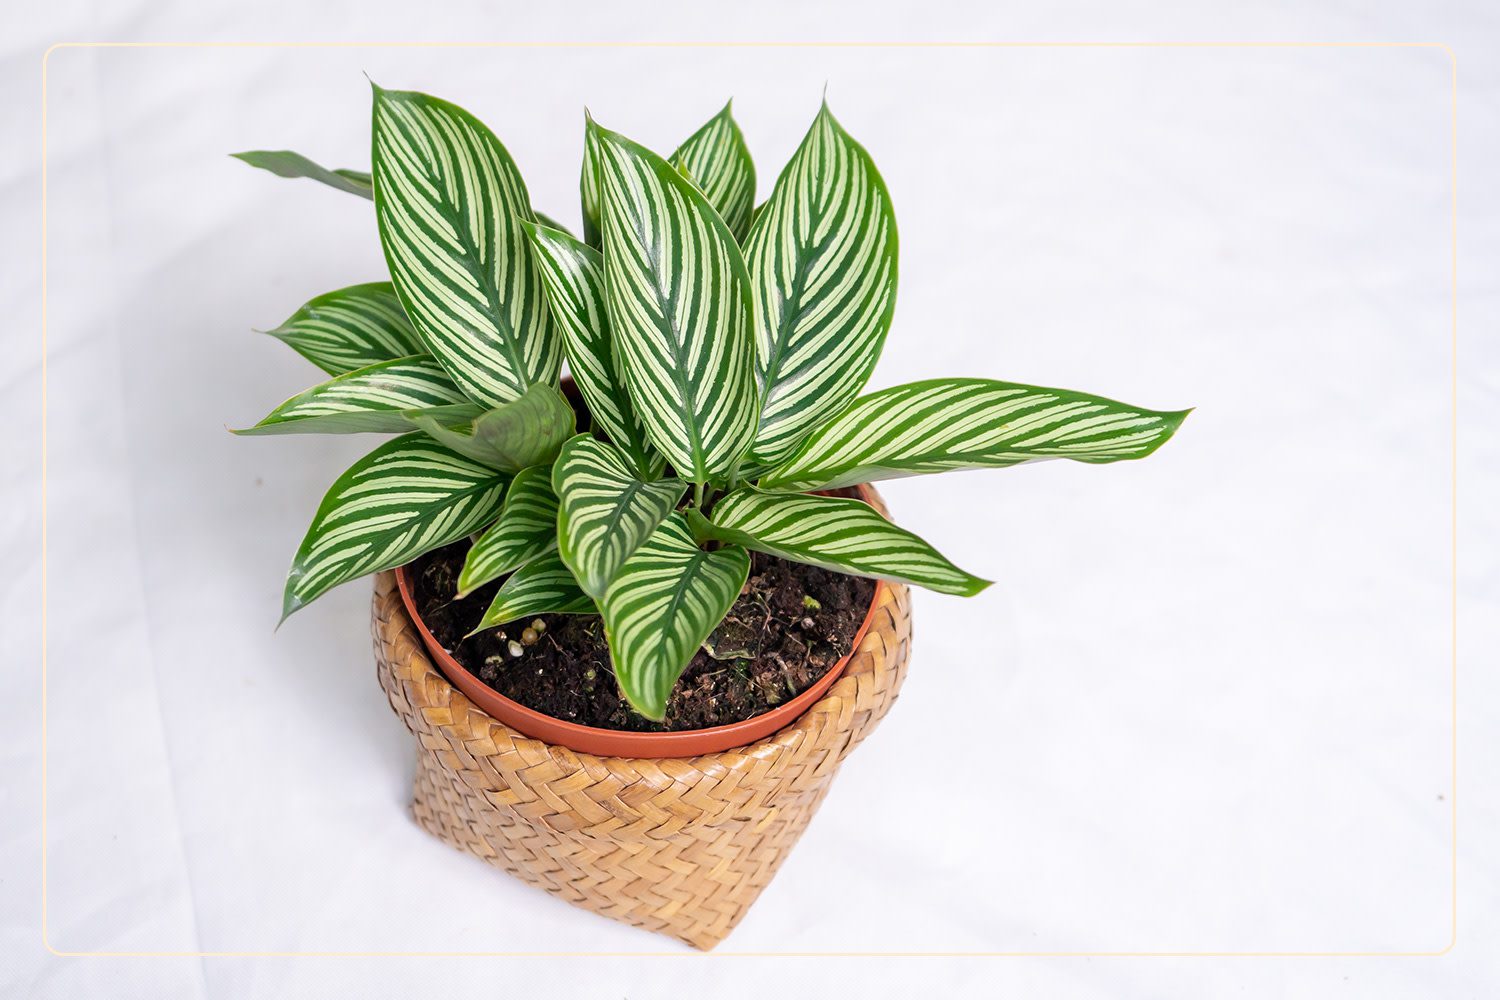 a Calathea plant (Calathea spp.), which is nontoxic to pets, grows indoors in a rattan planter